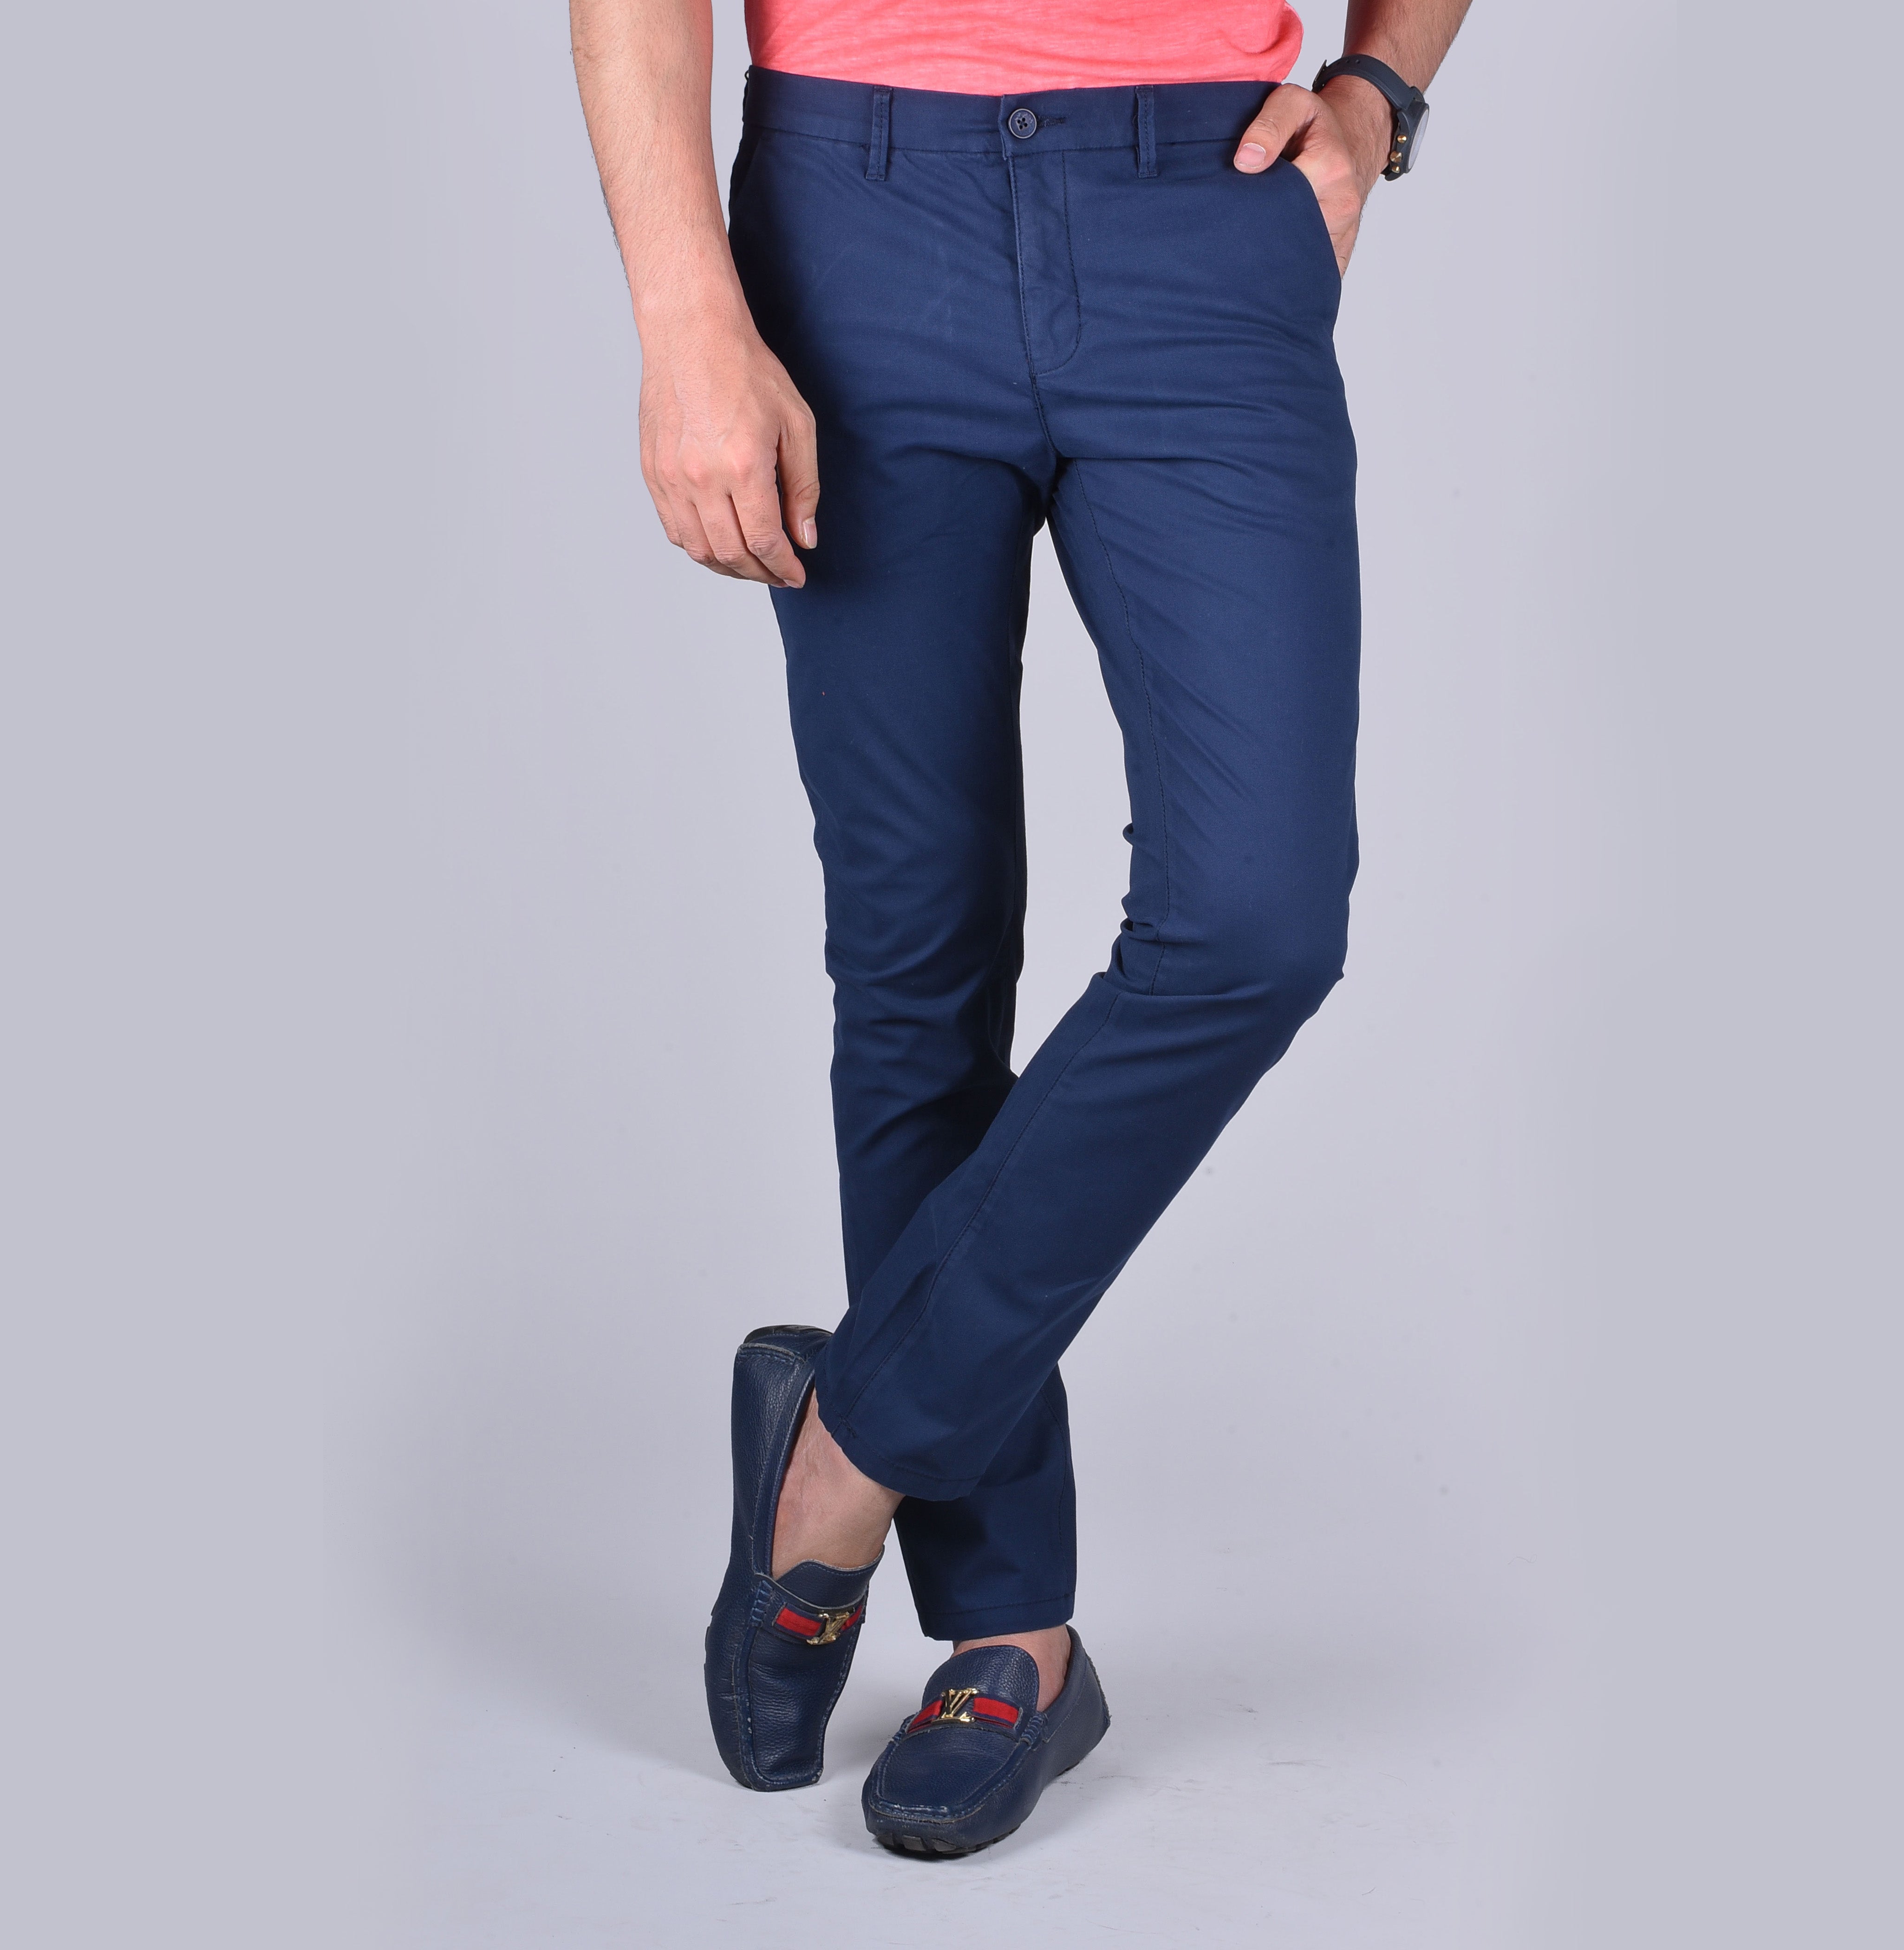 52 Best Chinos And Shirt Combinations For Men - Fashion Hombre | Black  shirt outfit men, Navy blue pants outfit, Shirt outfit men